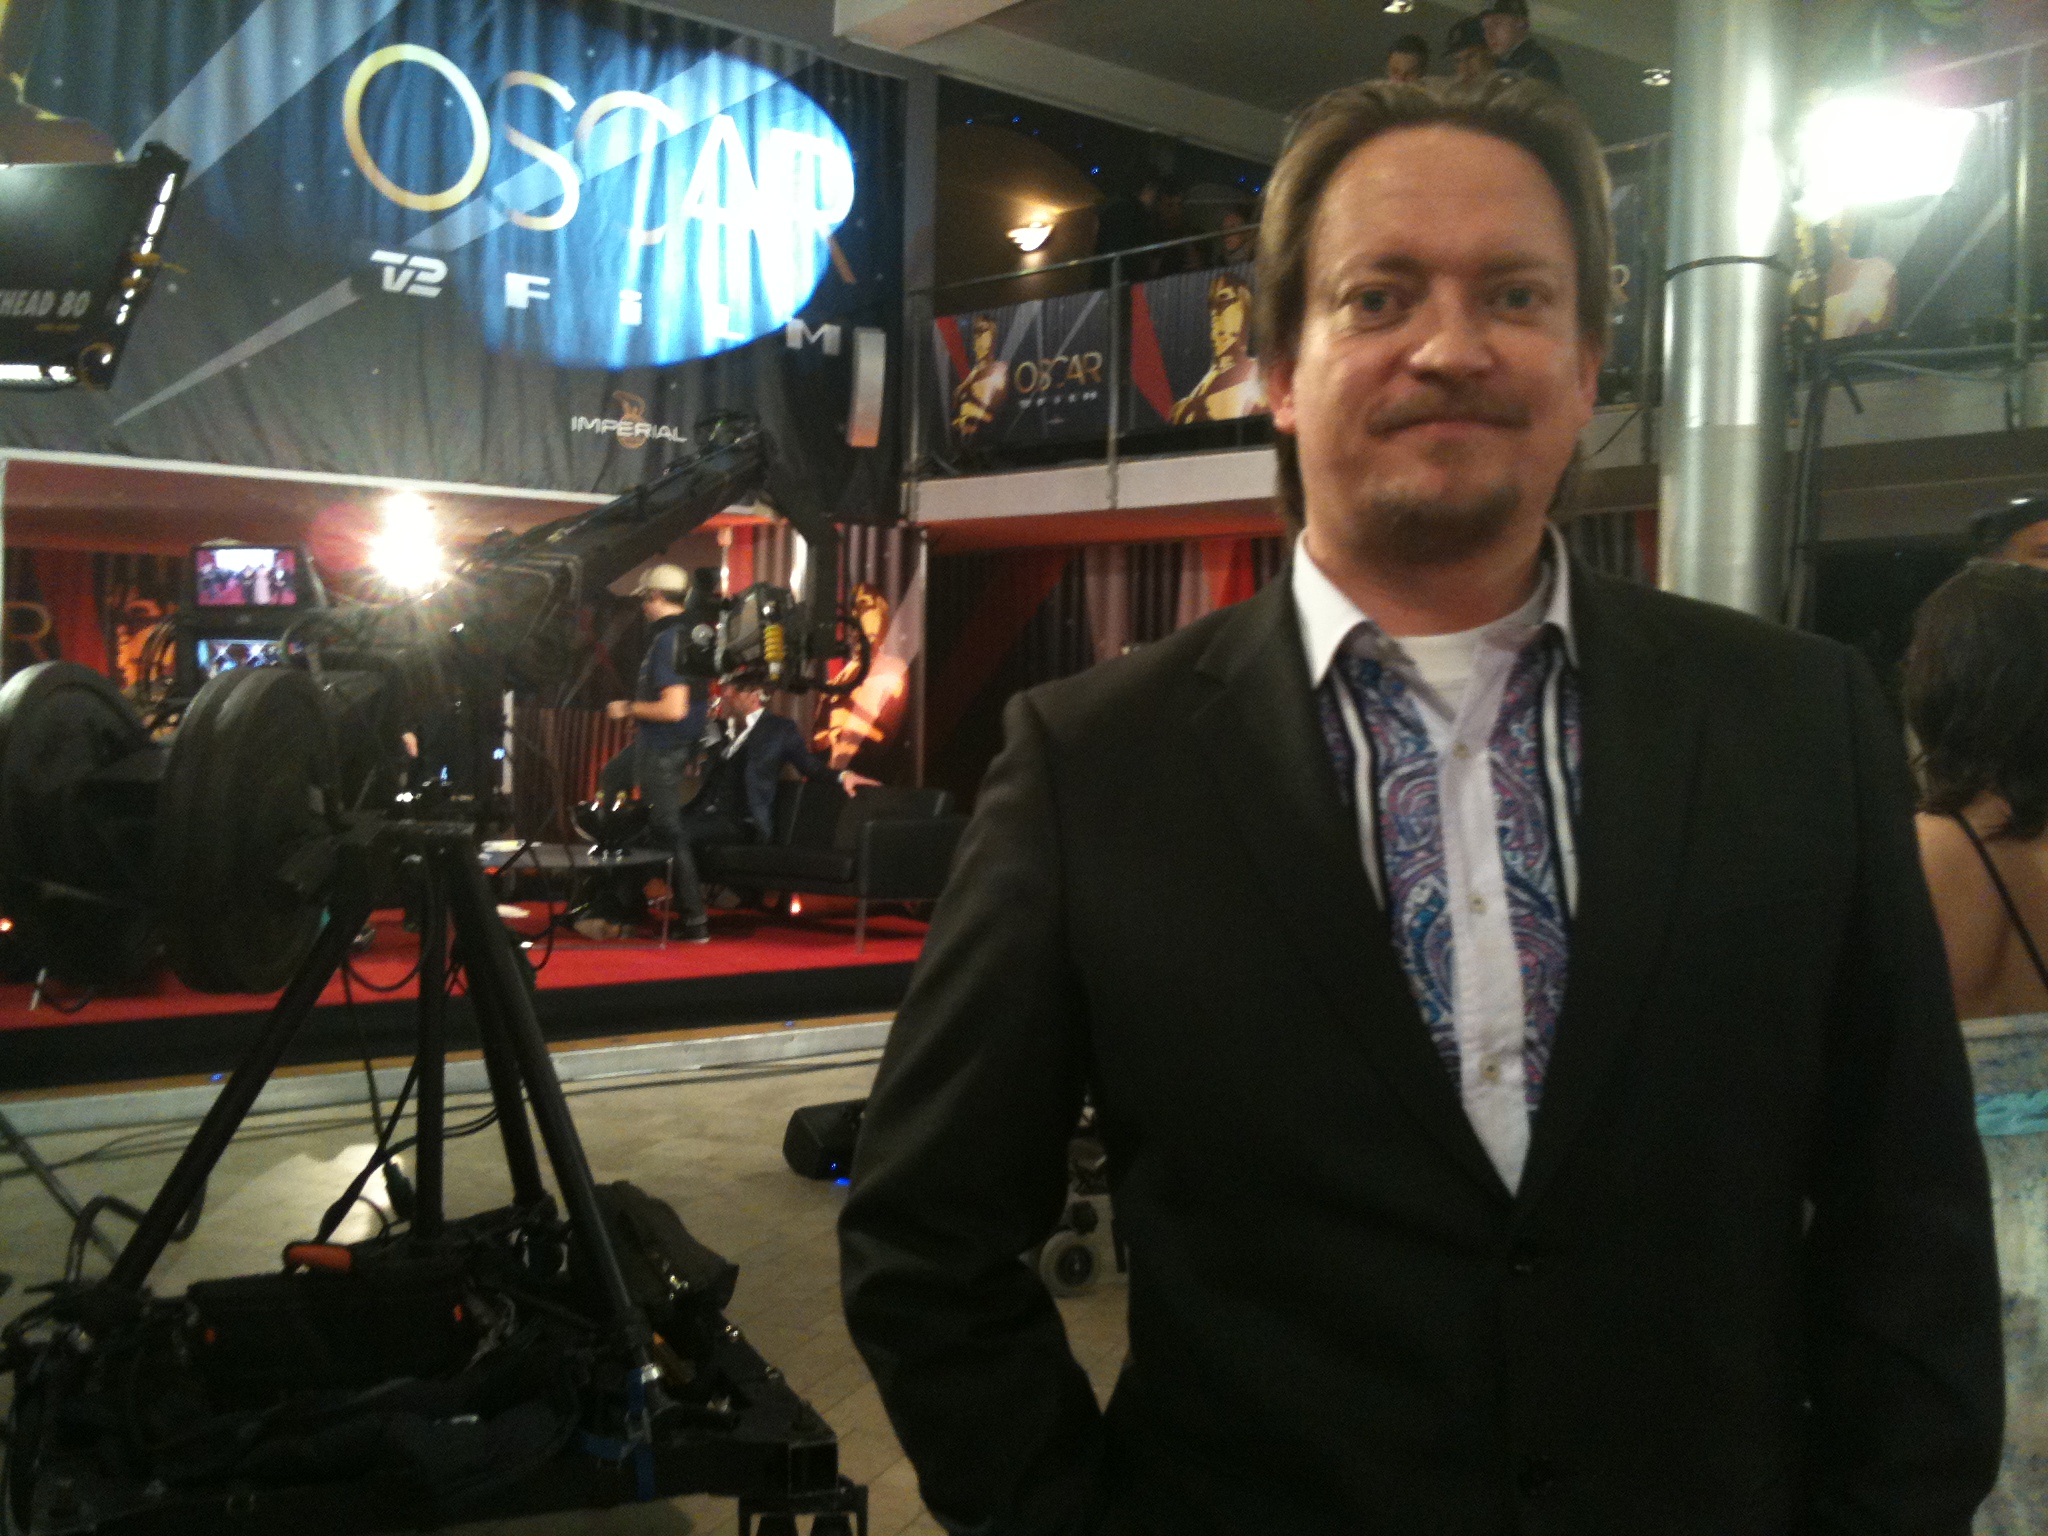 Maansson exec. producing the 83rd Academy Awards, Danish wraparound show 2011.